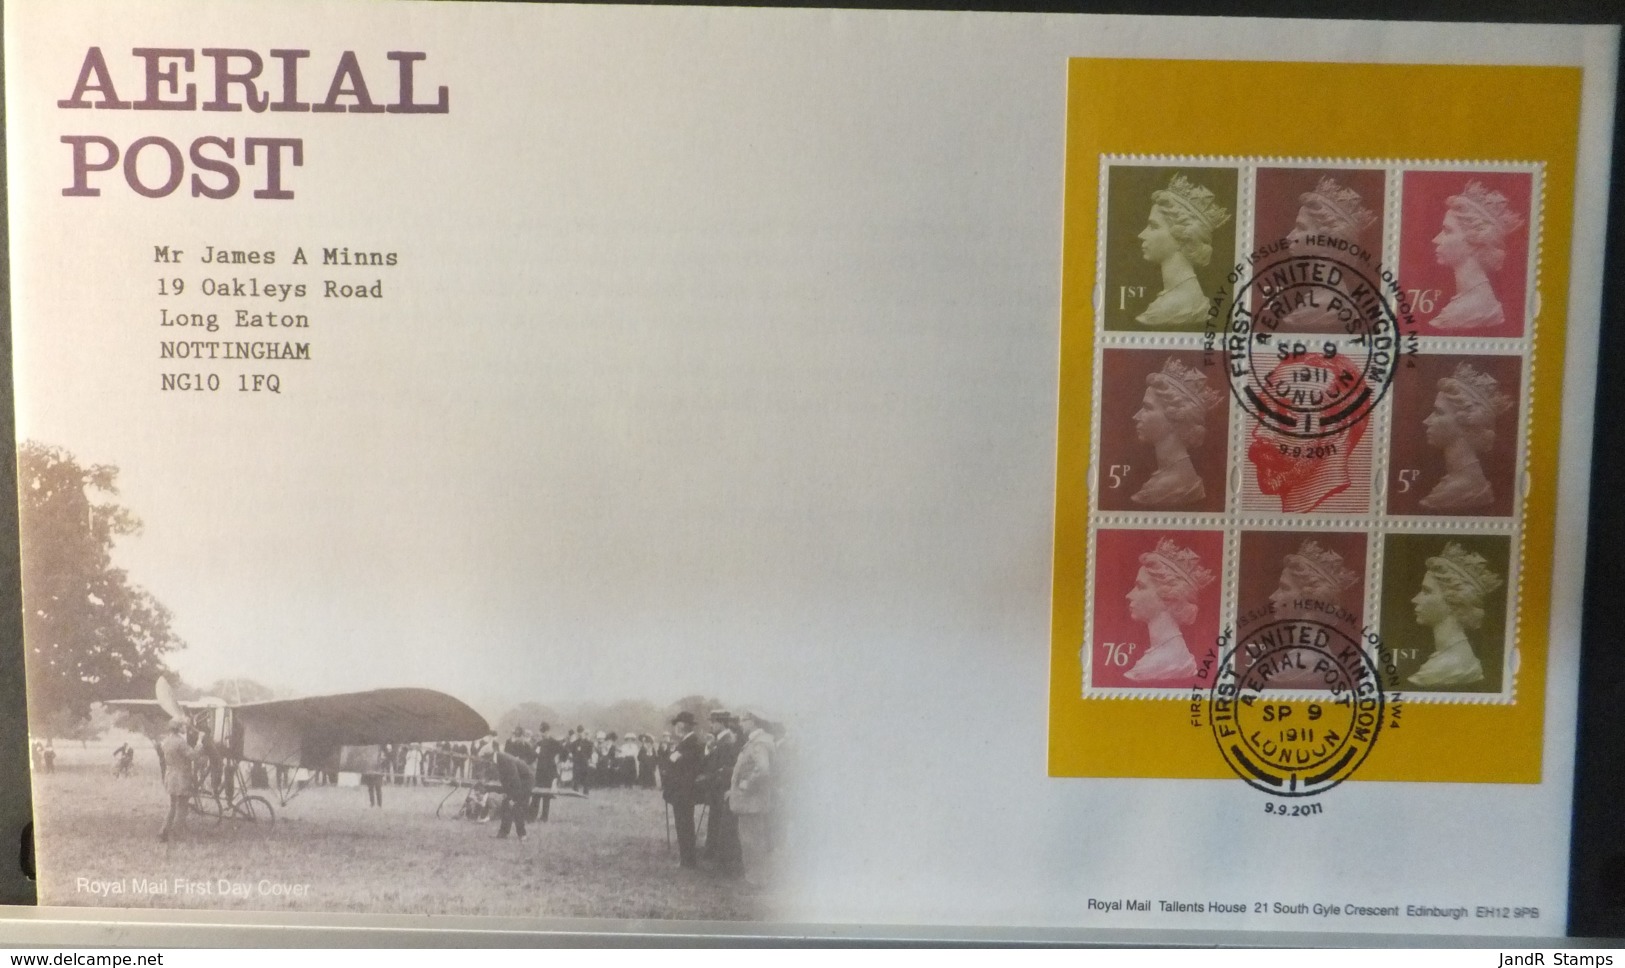 GB Booklet Pane  2011 FDC - Aerial Post Hendon Postmark FIRST DAY COVER AVIATION POSTAL KGV - 2011-2020 Decimal Issues